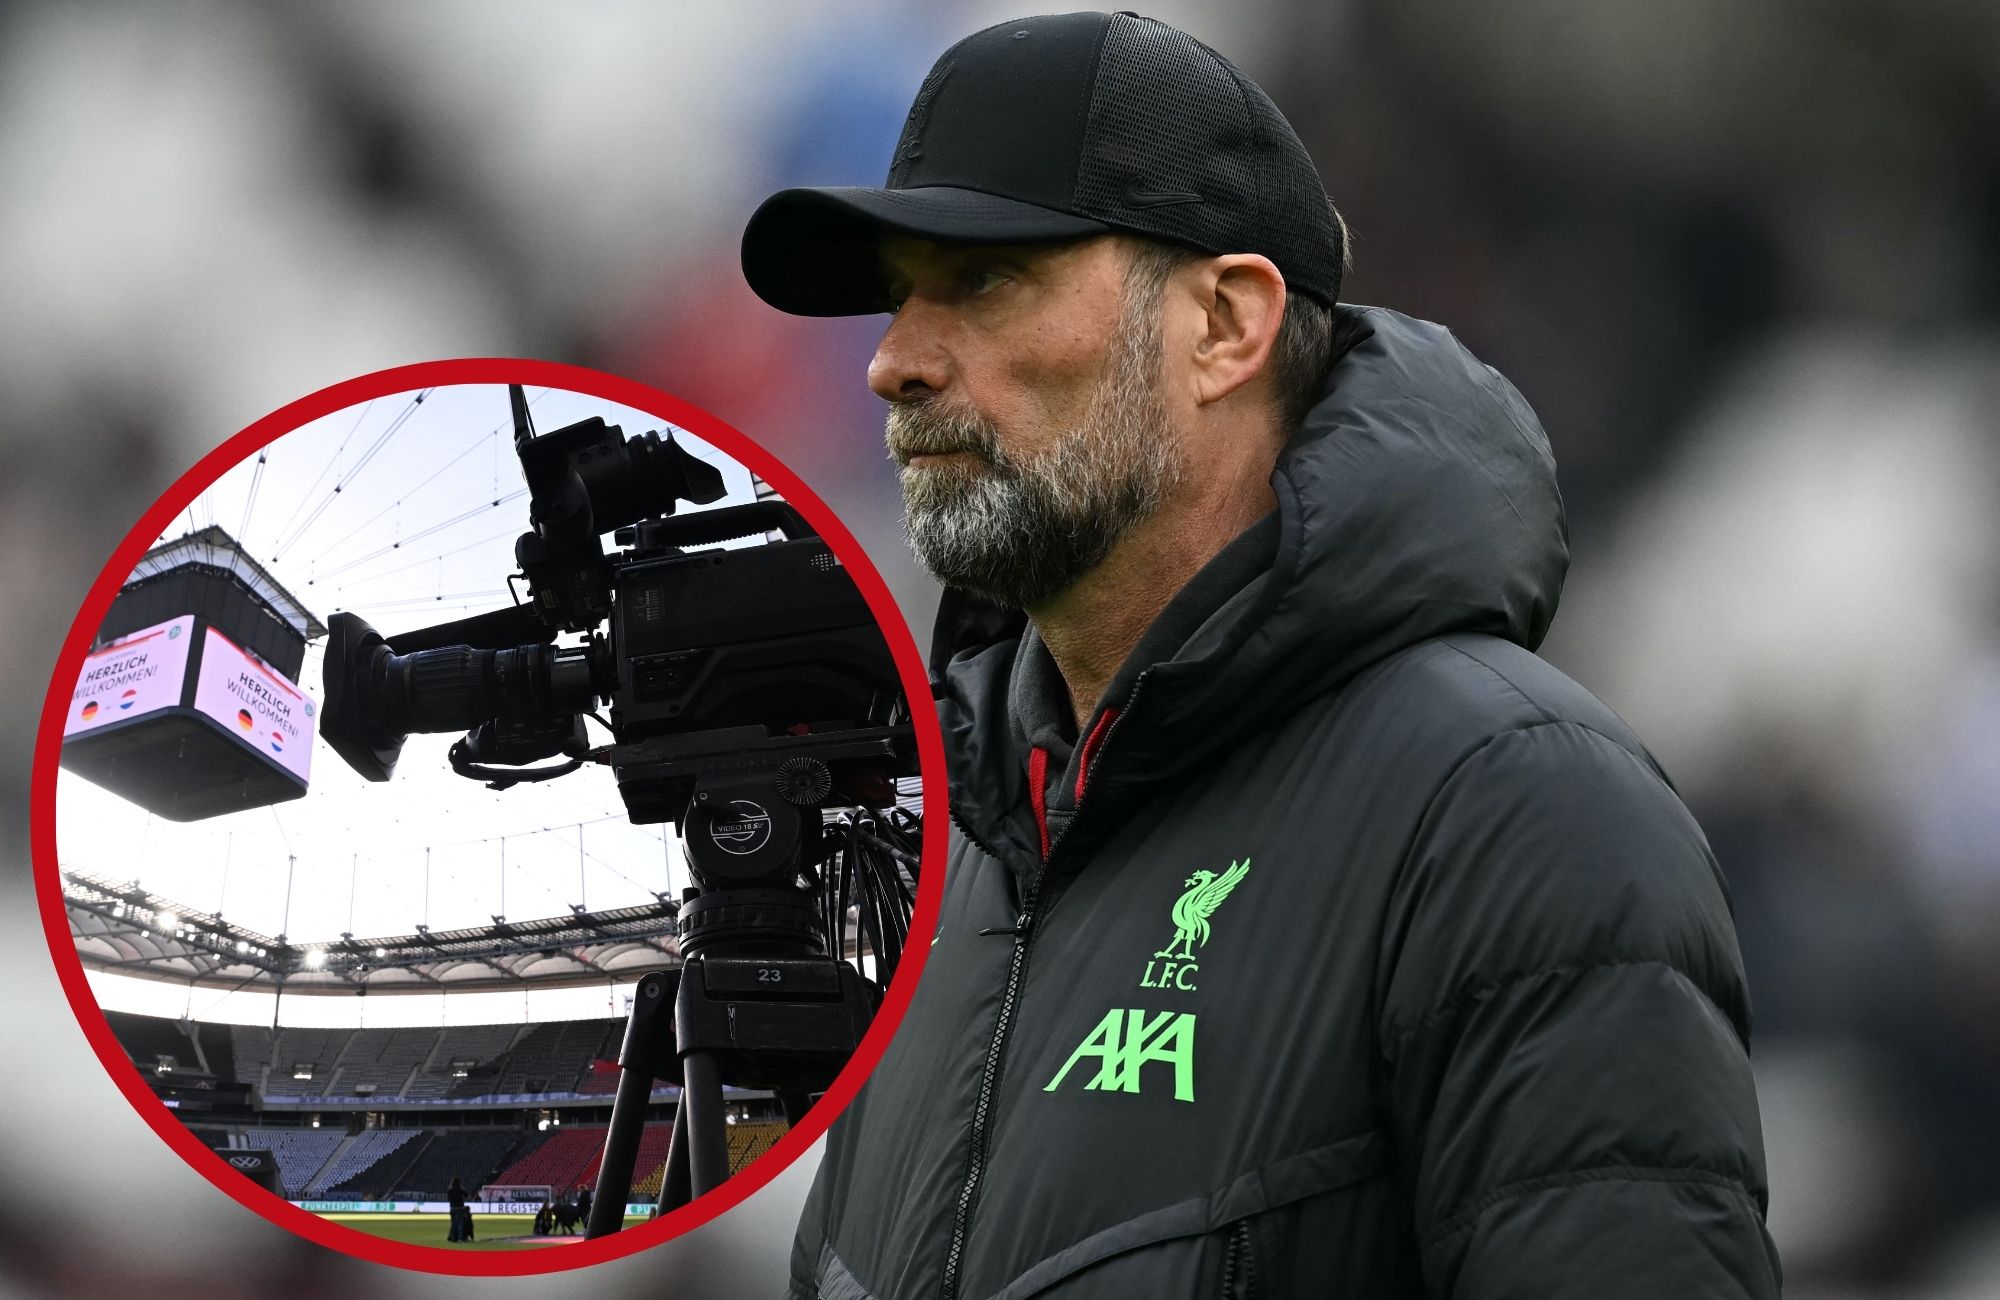 Klopp tells broadcaster he’s never watching their service again in brutal presser